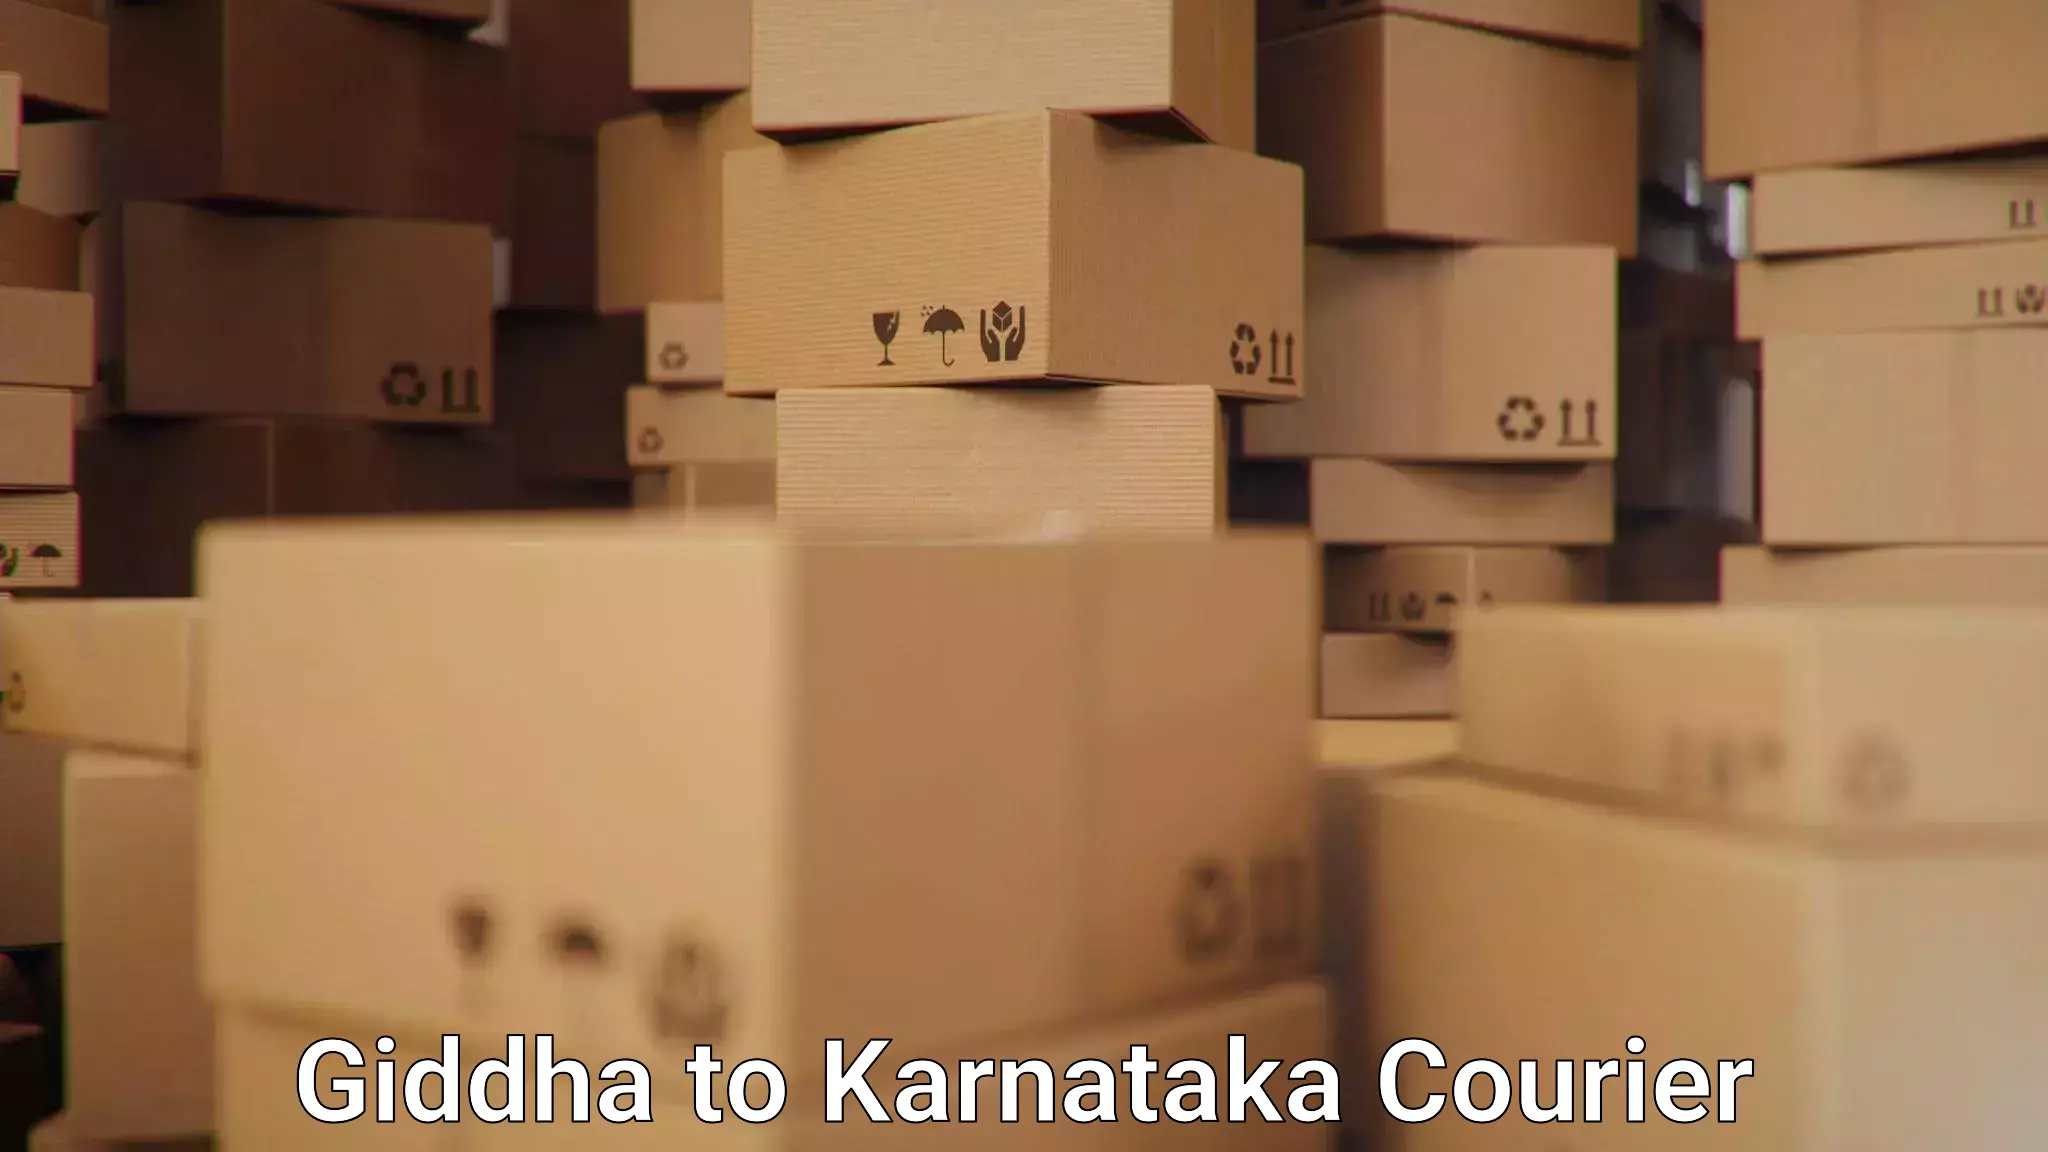 State-of-the-art courier technology in Giddha to Badami